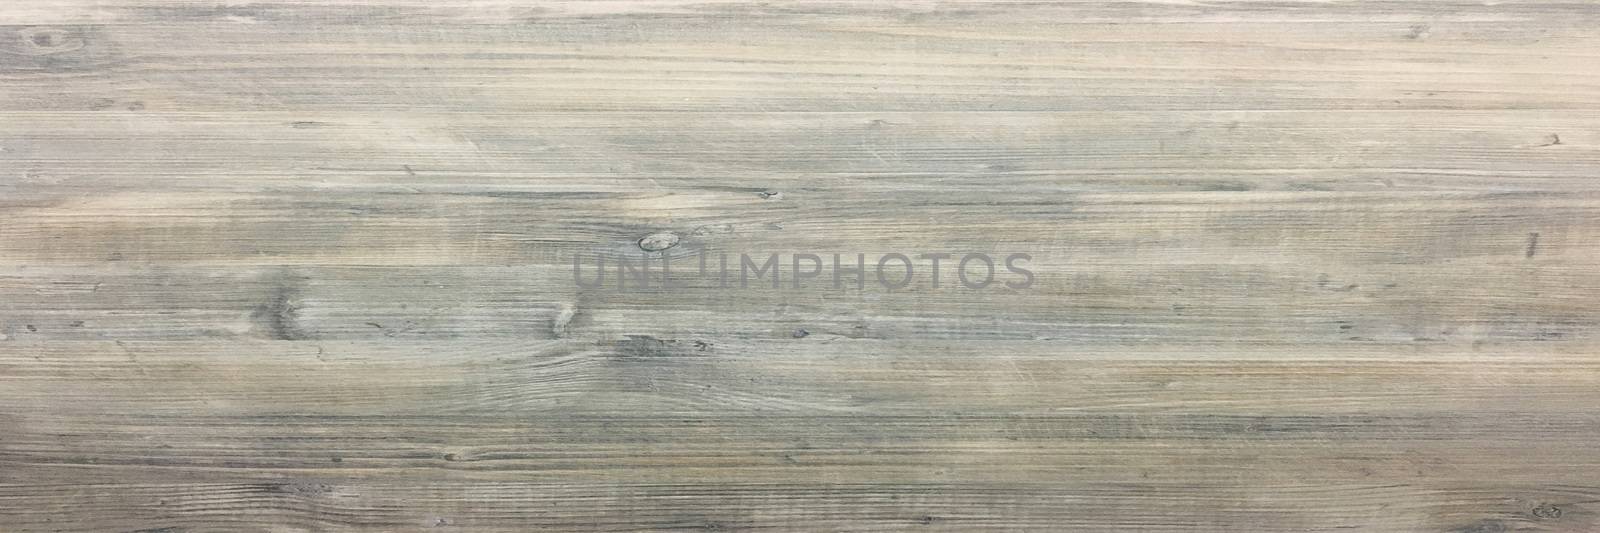 Light soft wood surface as background, wood texture. Wood plank. by titco